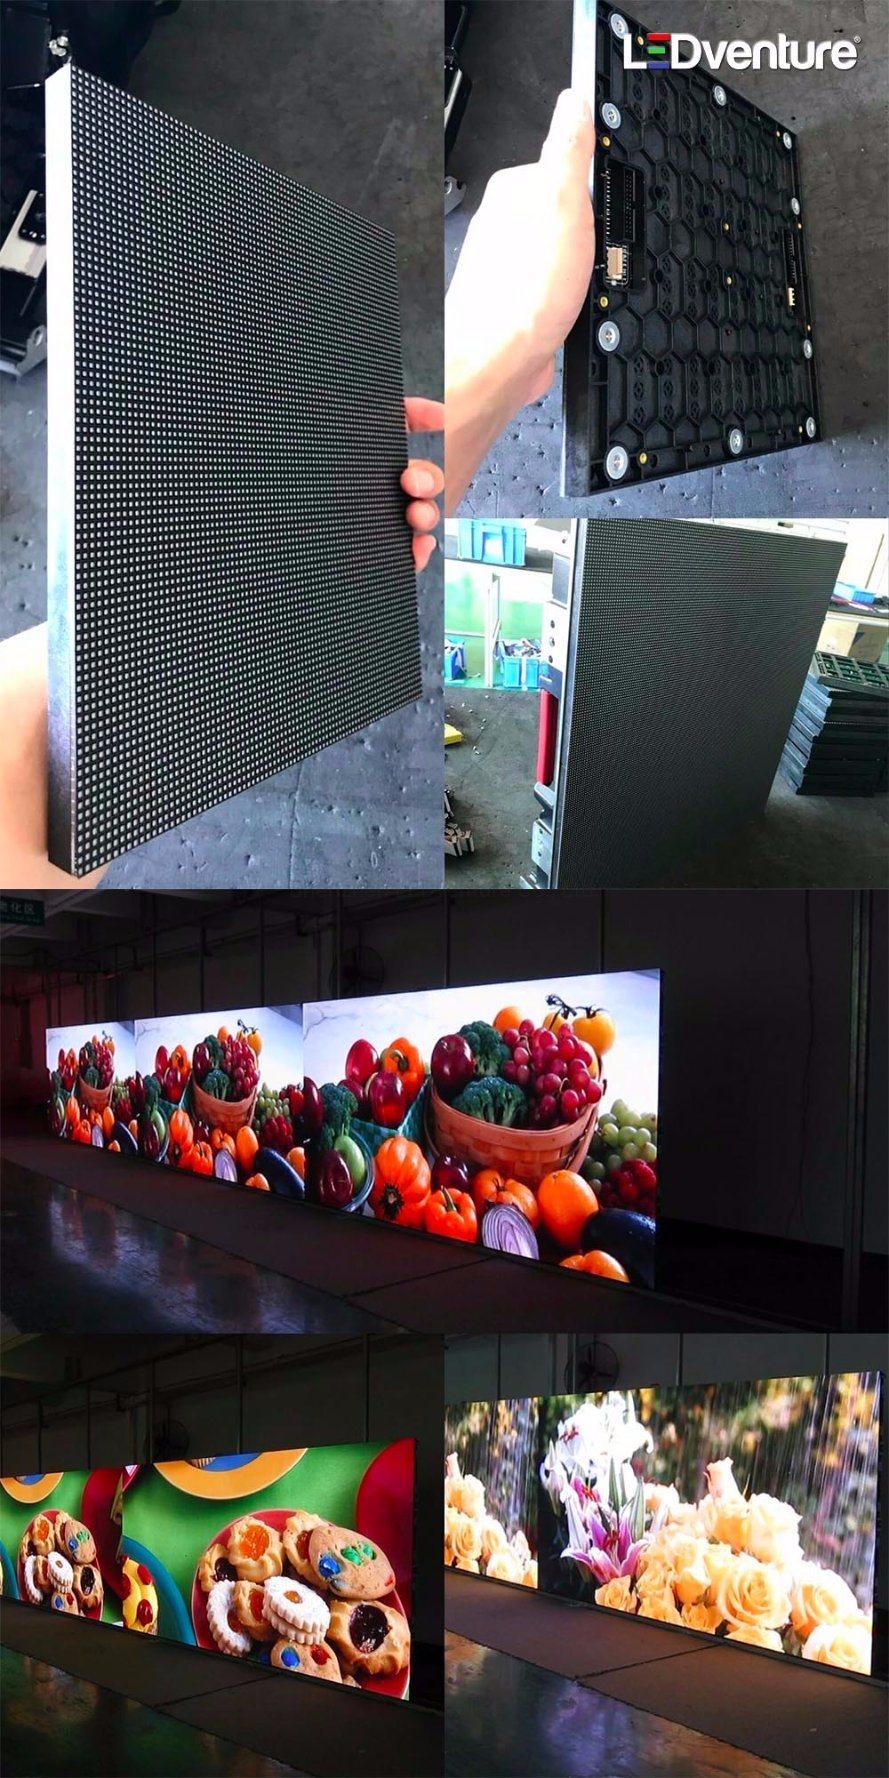 High Resolution Outdoor P4.81 Rental LED Display Board